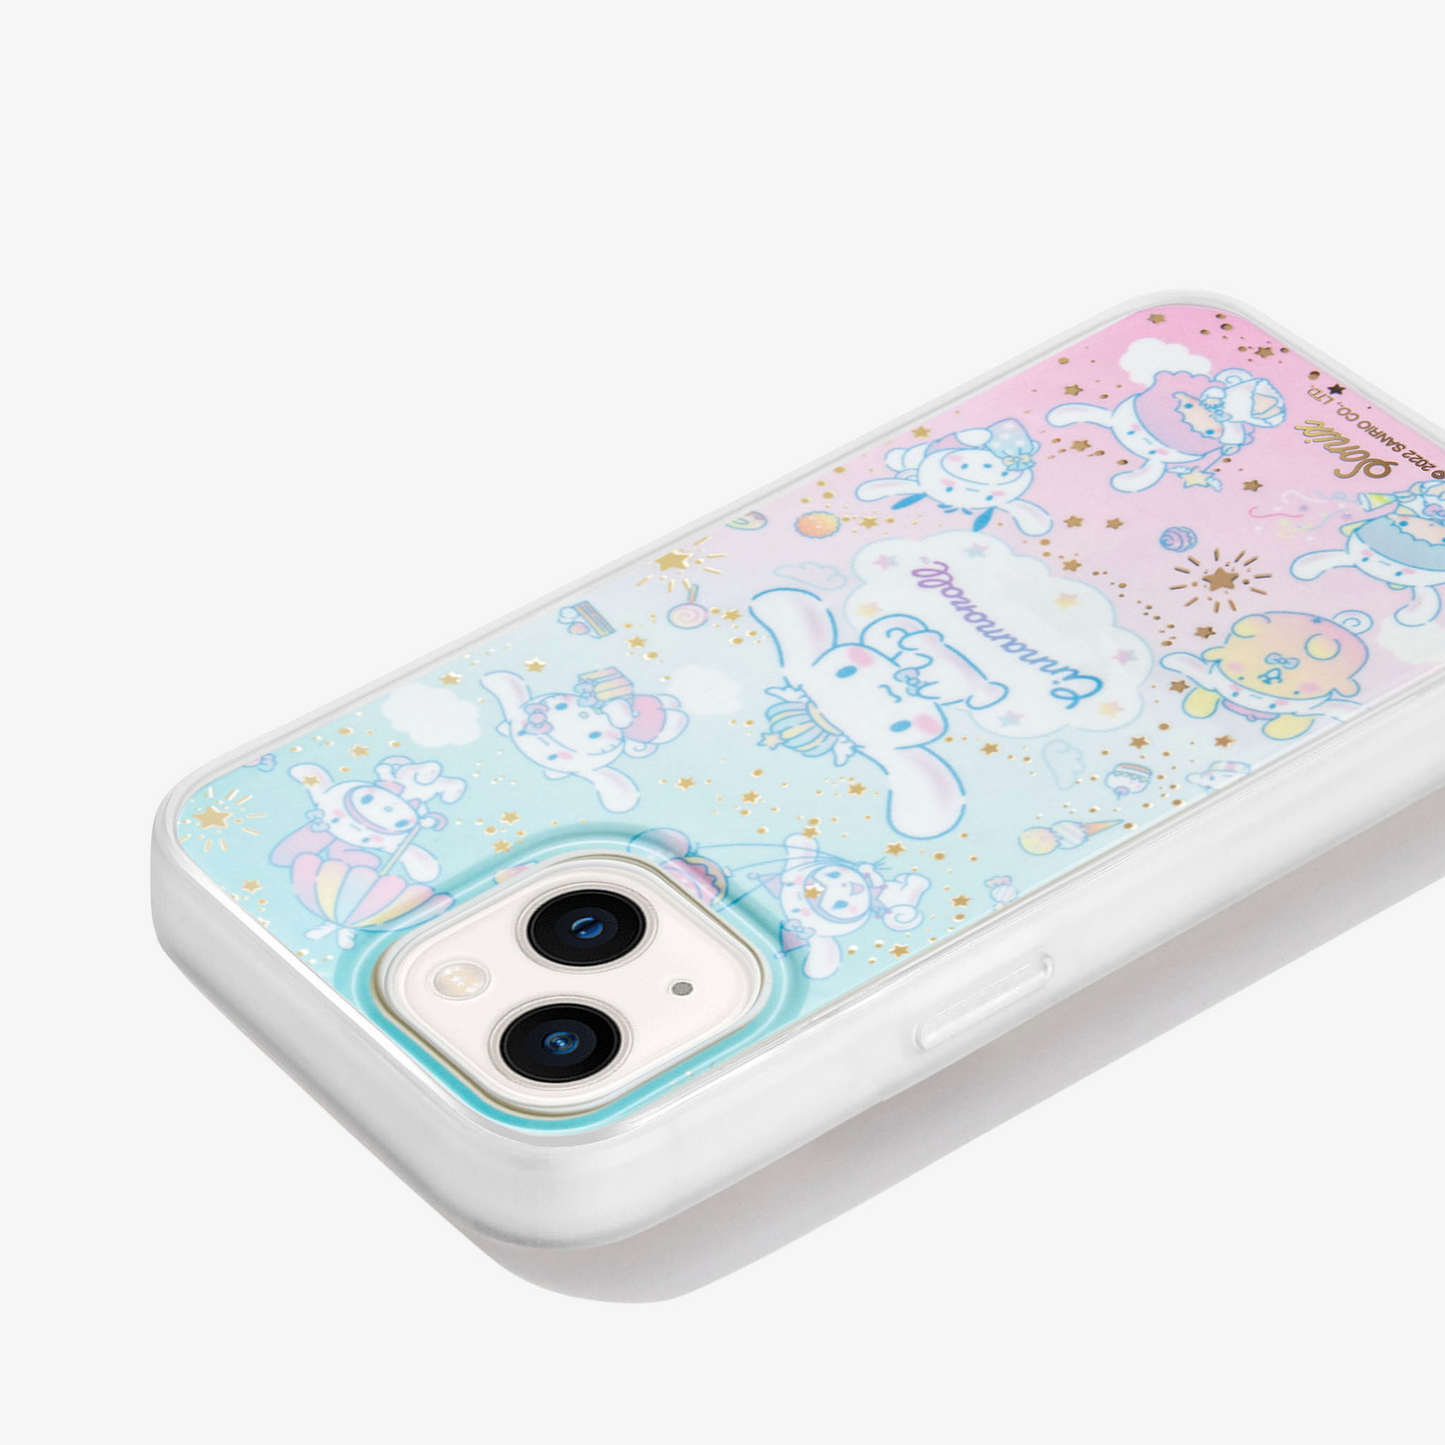 Pink and blue iphone case with gold stars, clouds, and hello kitty character cinnamoroll on an iphone 13 side view